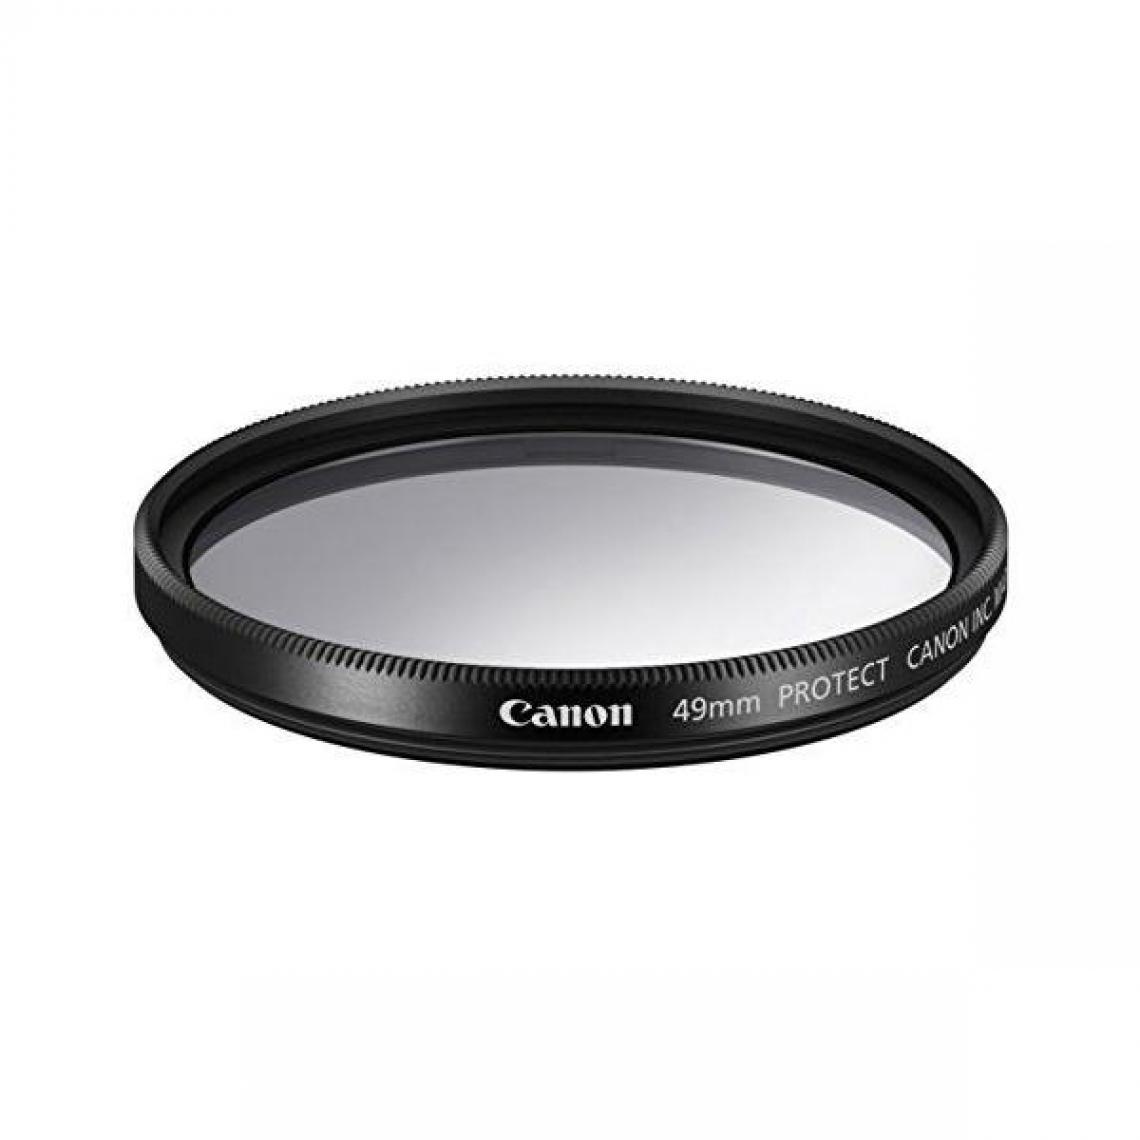 Canon - 49mm Protect Filter - Briques Lego